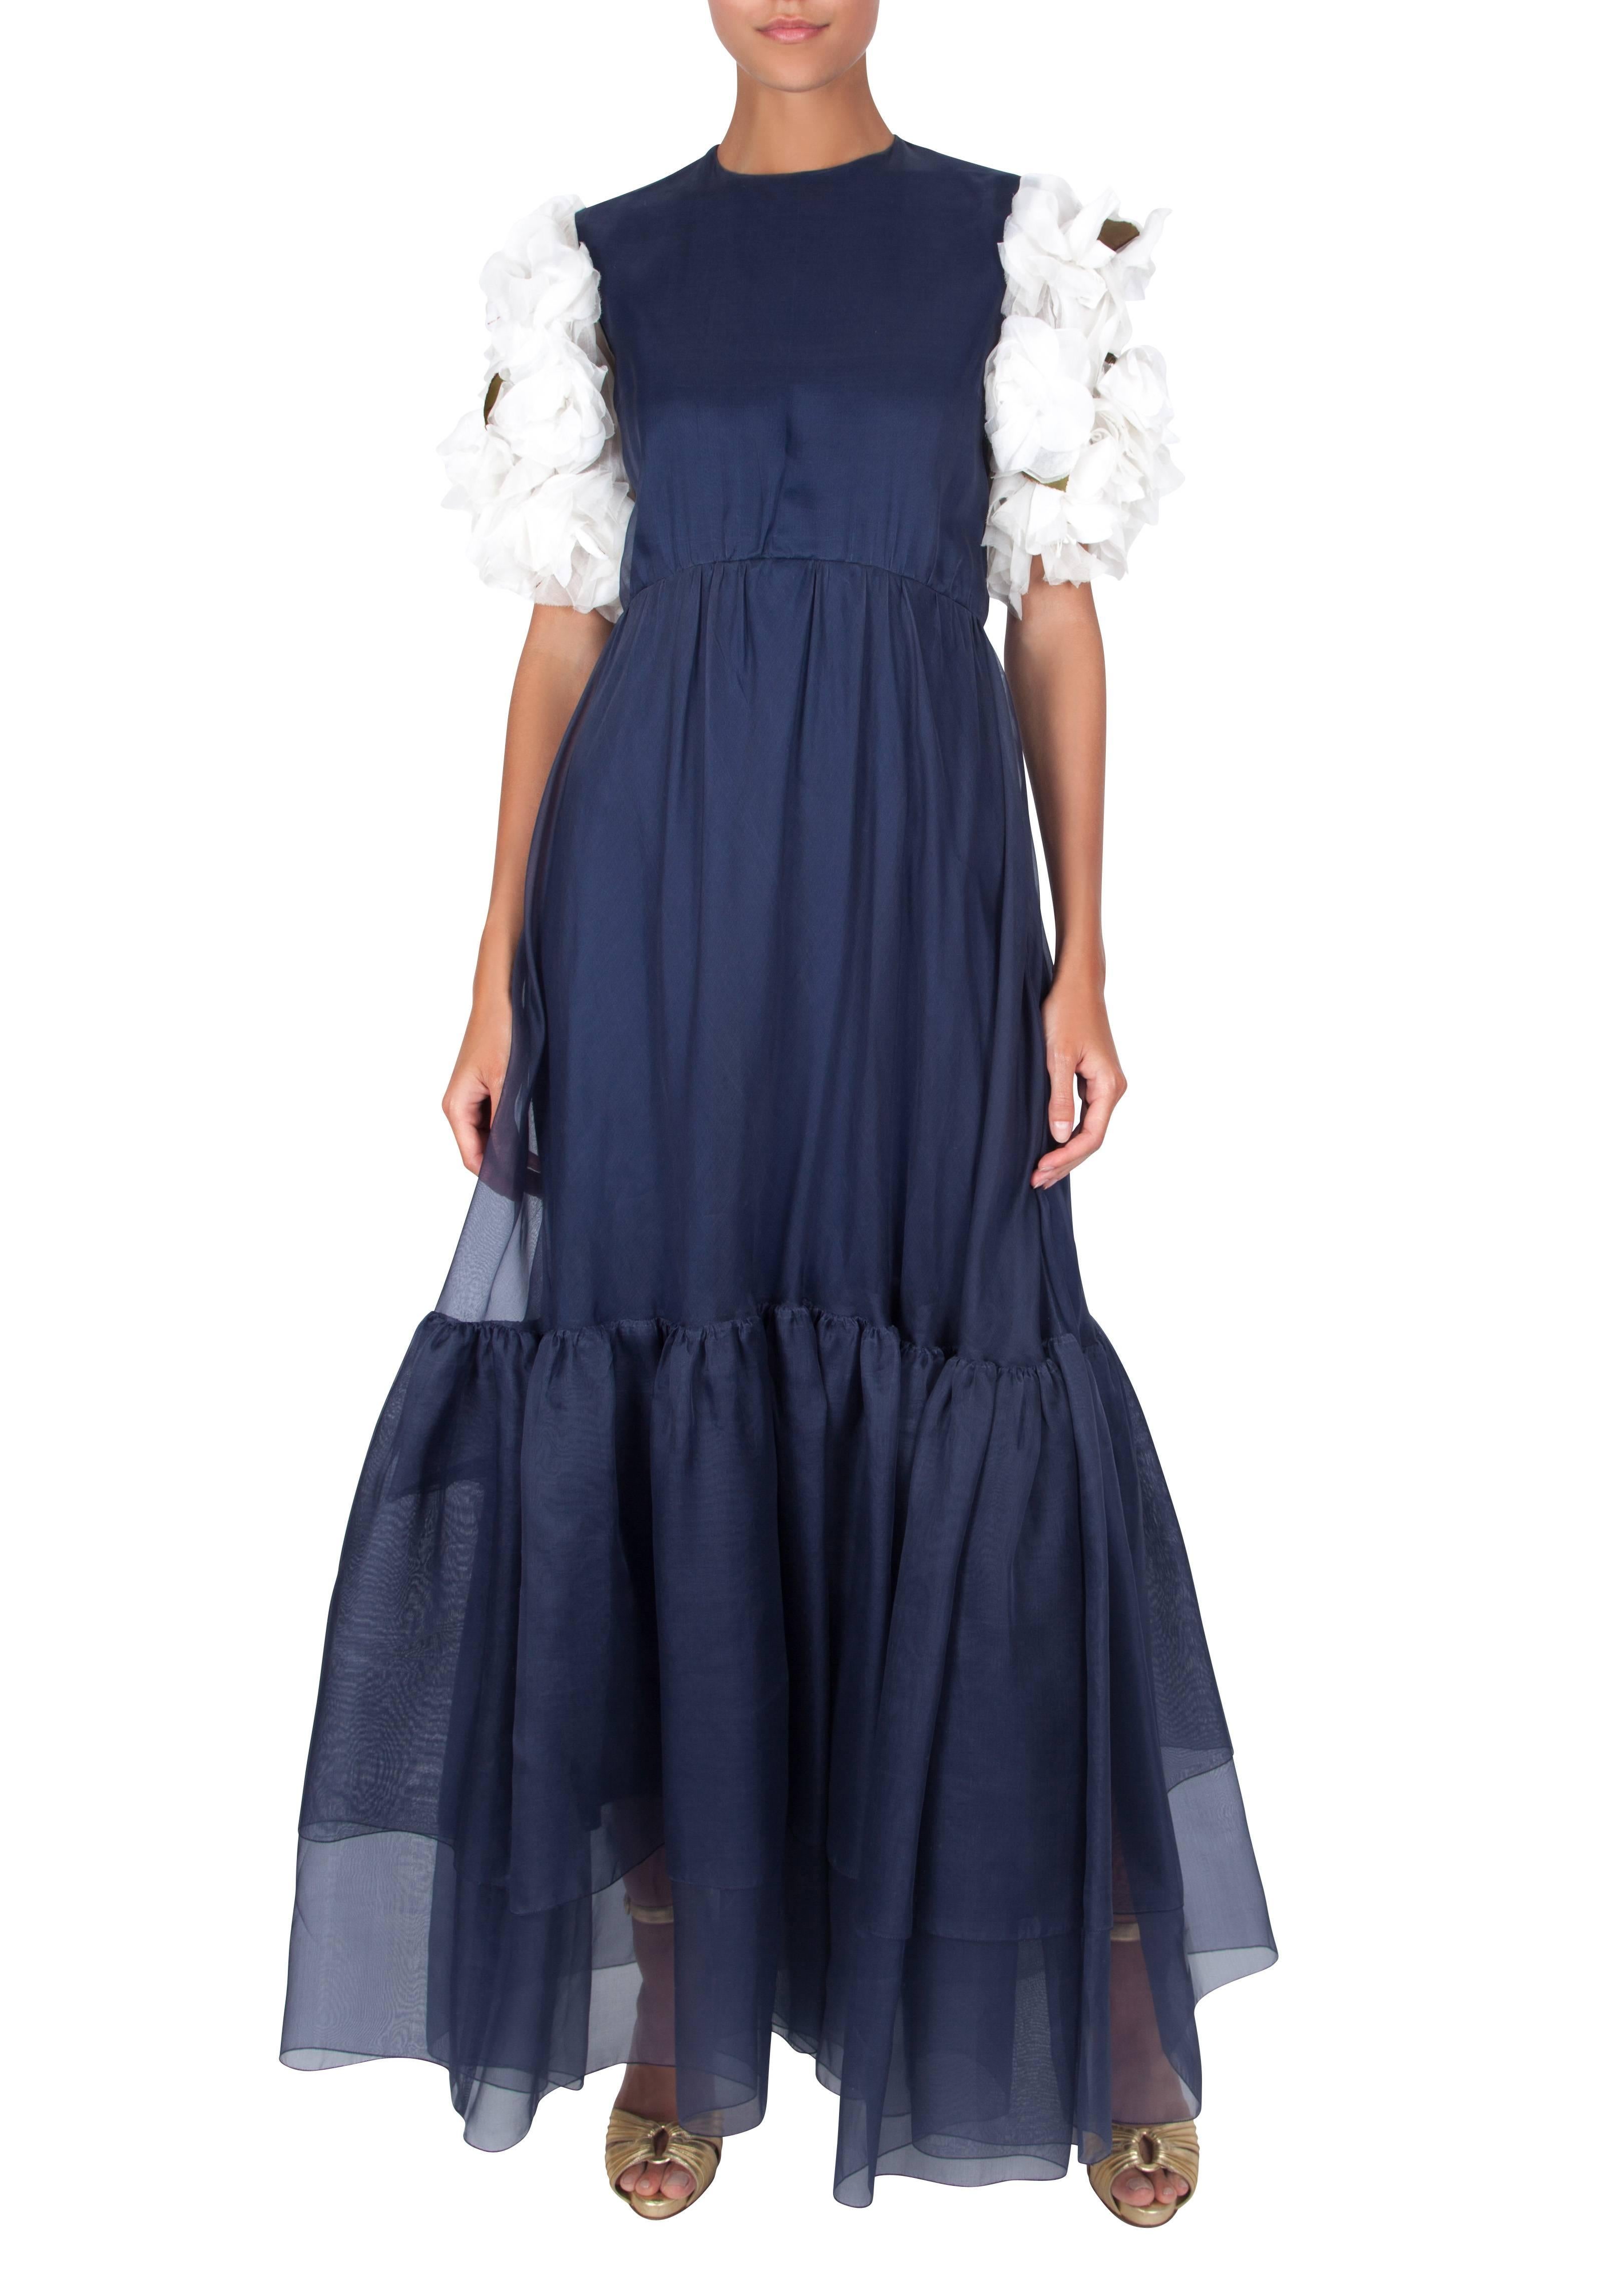 A navy blue silk organza dress with puff sleeves featuring from white appliqued flowers by London couturier Harald. The full-length dress is constructed from a dark blue polyester jersey underskirt with a layer of navy blue sheer silk organza over